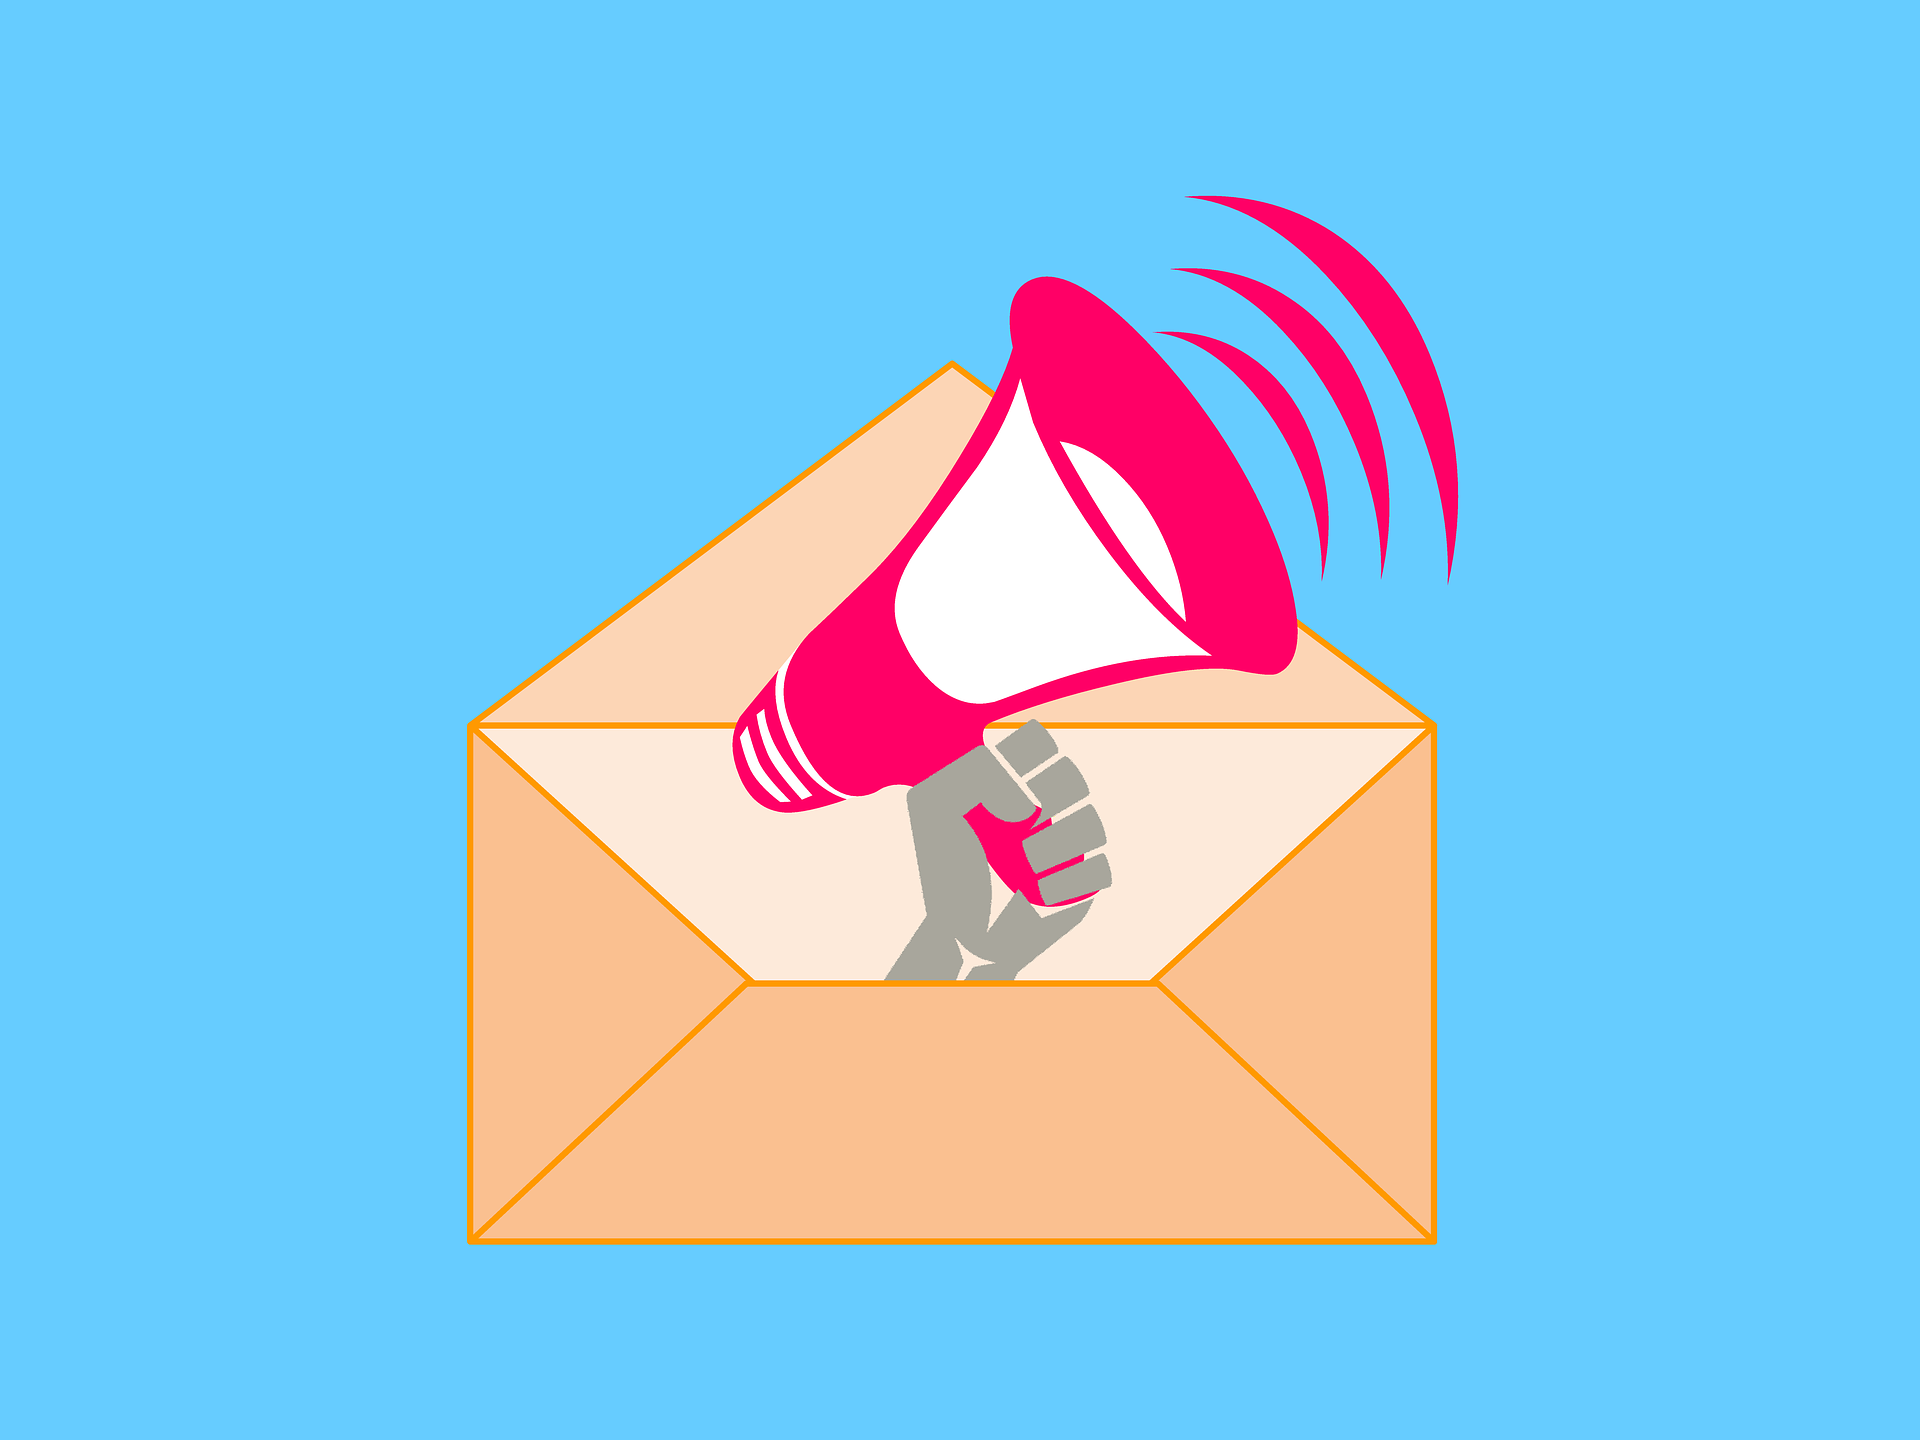 I hand coming out of an envelope holding a megaphone, published to: "3 Tips for Running Non-Profit Email Marketing Campaigns"